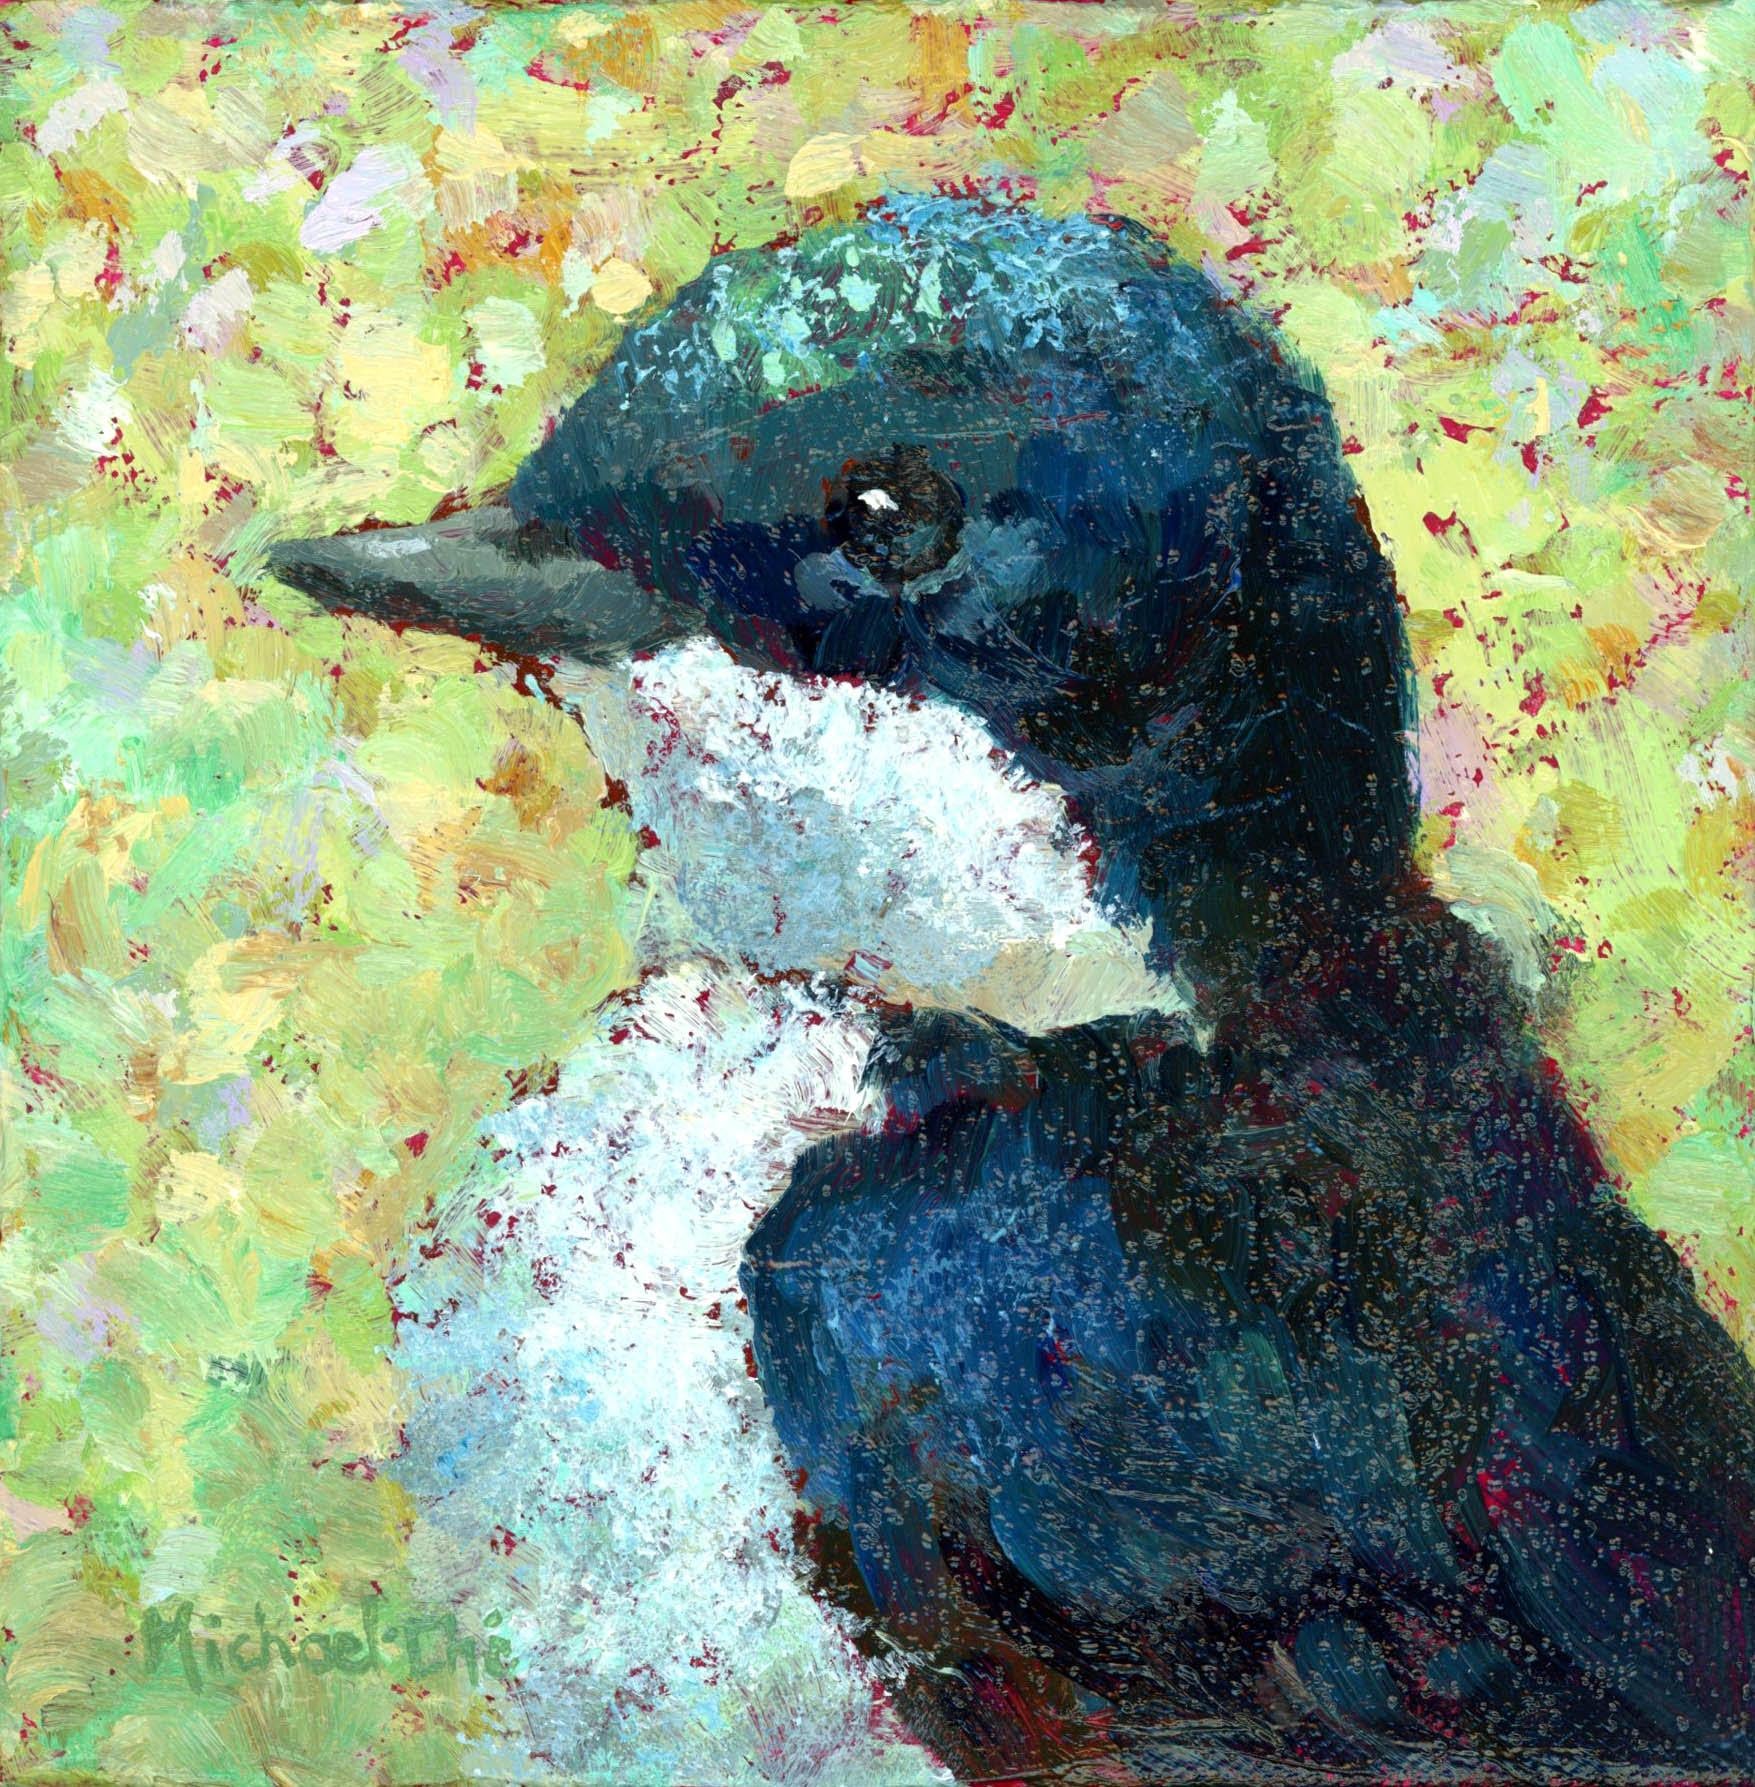 Michael-Che Swisher Animal Painting - "Sweet Swallow" Impasto oil painting of a blue bird on yellow/green background